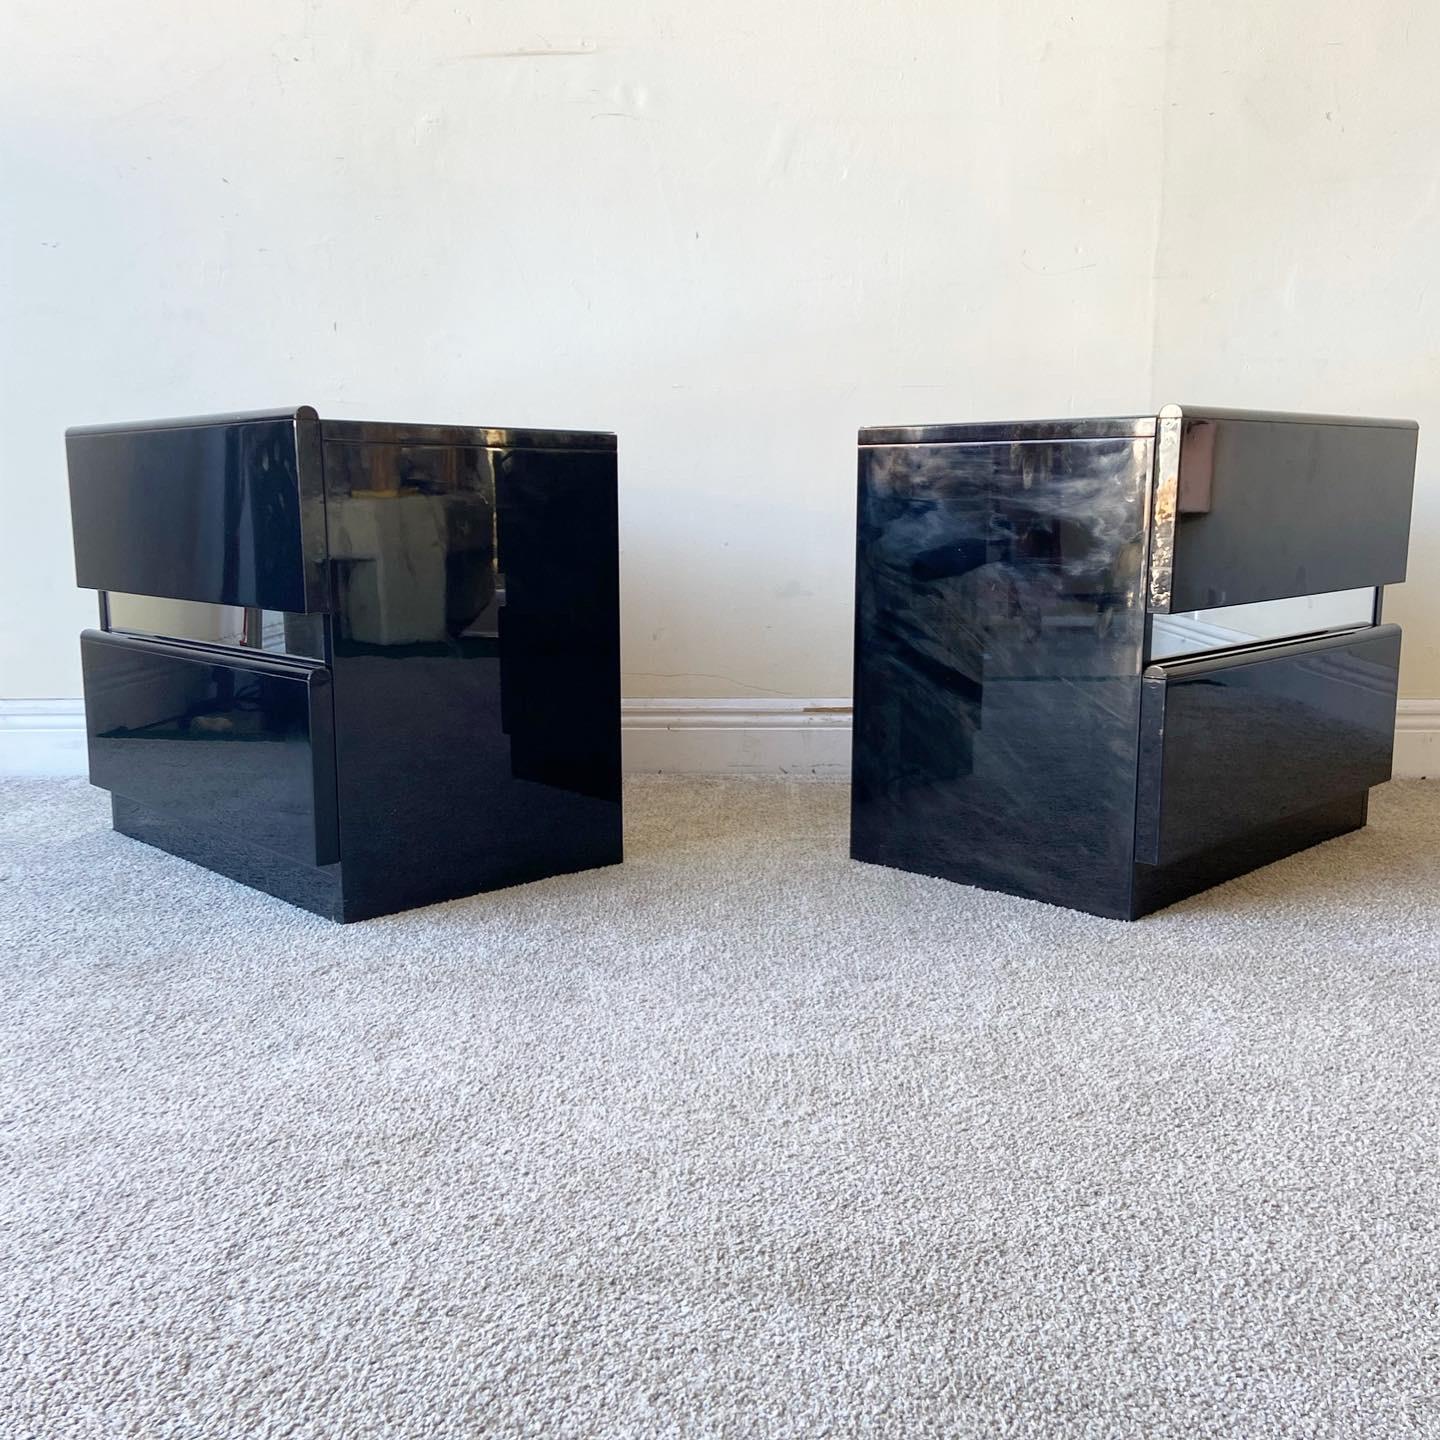 Amazing pair of Italian black lacquered nightstands. Each features two stations drawers with a mirror panel between them and a mirrored top.

Additional Information:
Material: Mirror, Wood
Color: Black
Style: Italian, Postmodern
Time Period: